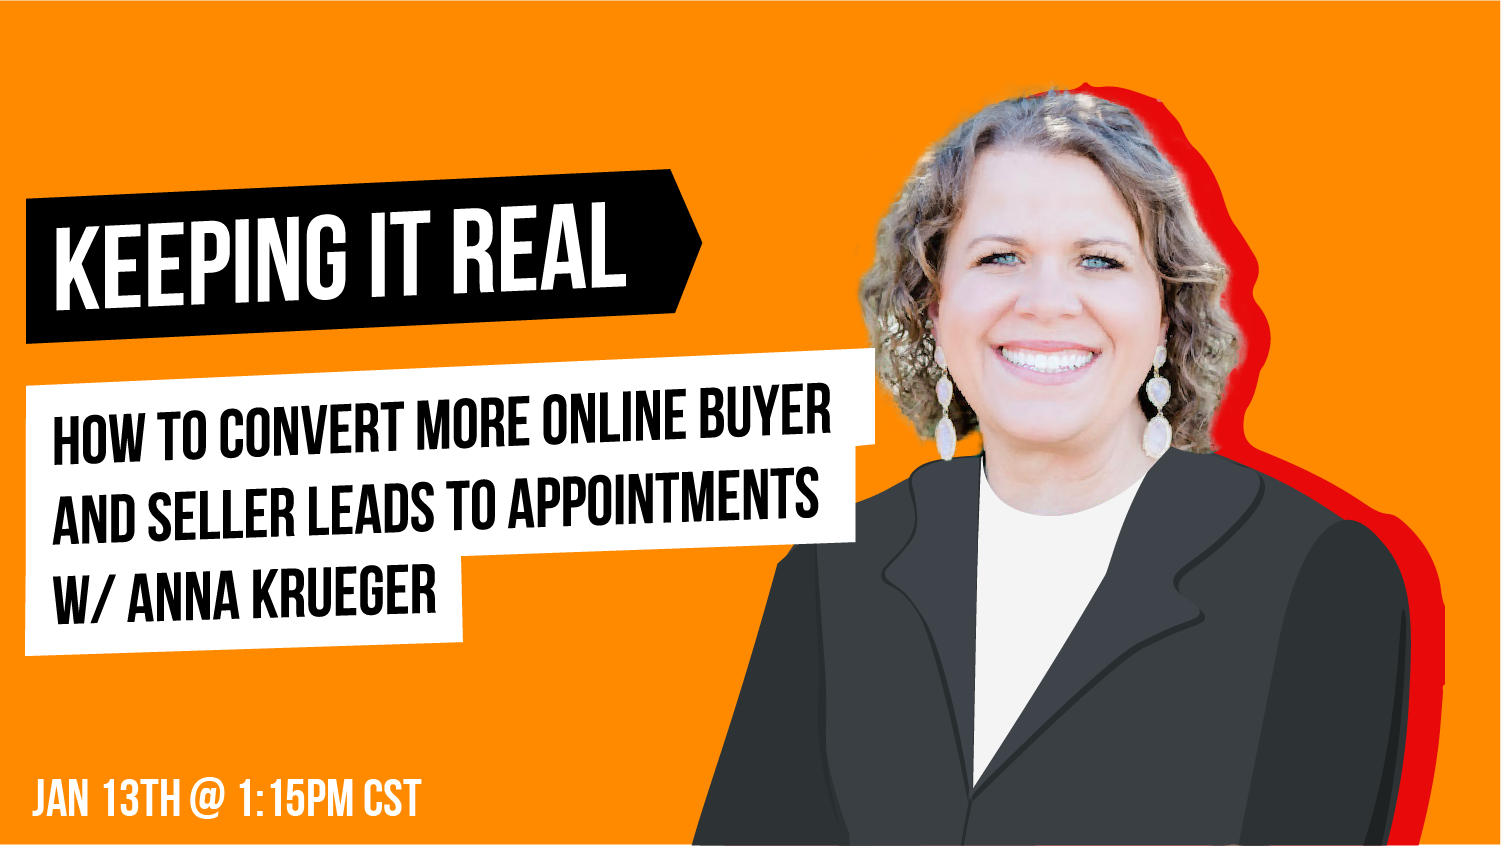 How to Convert More Online Buyer and Seller Leads to Appointments w/ Anna Krueger